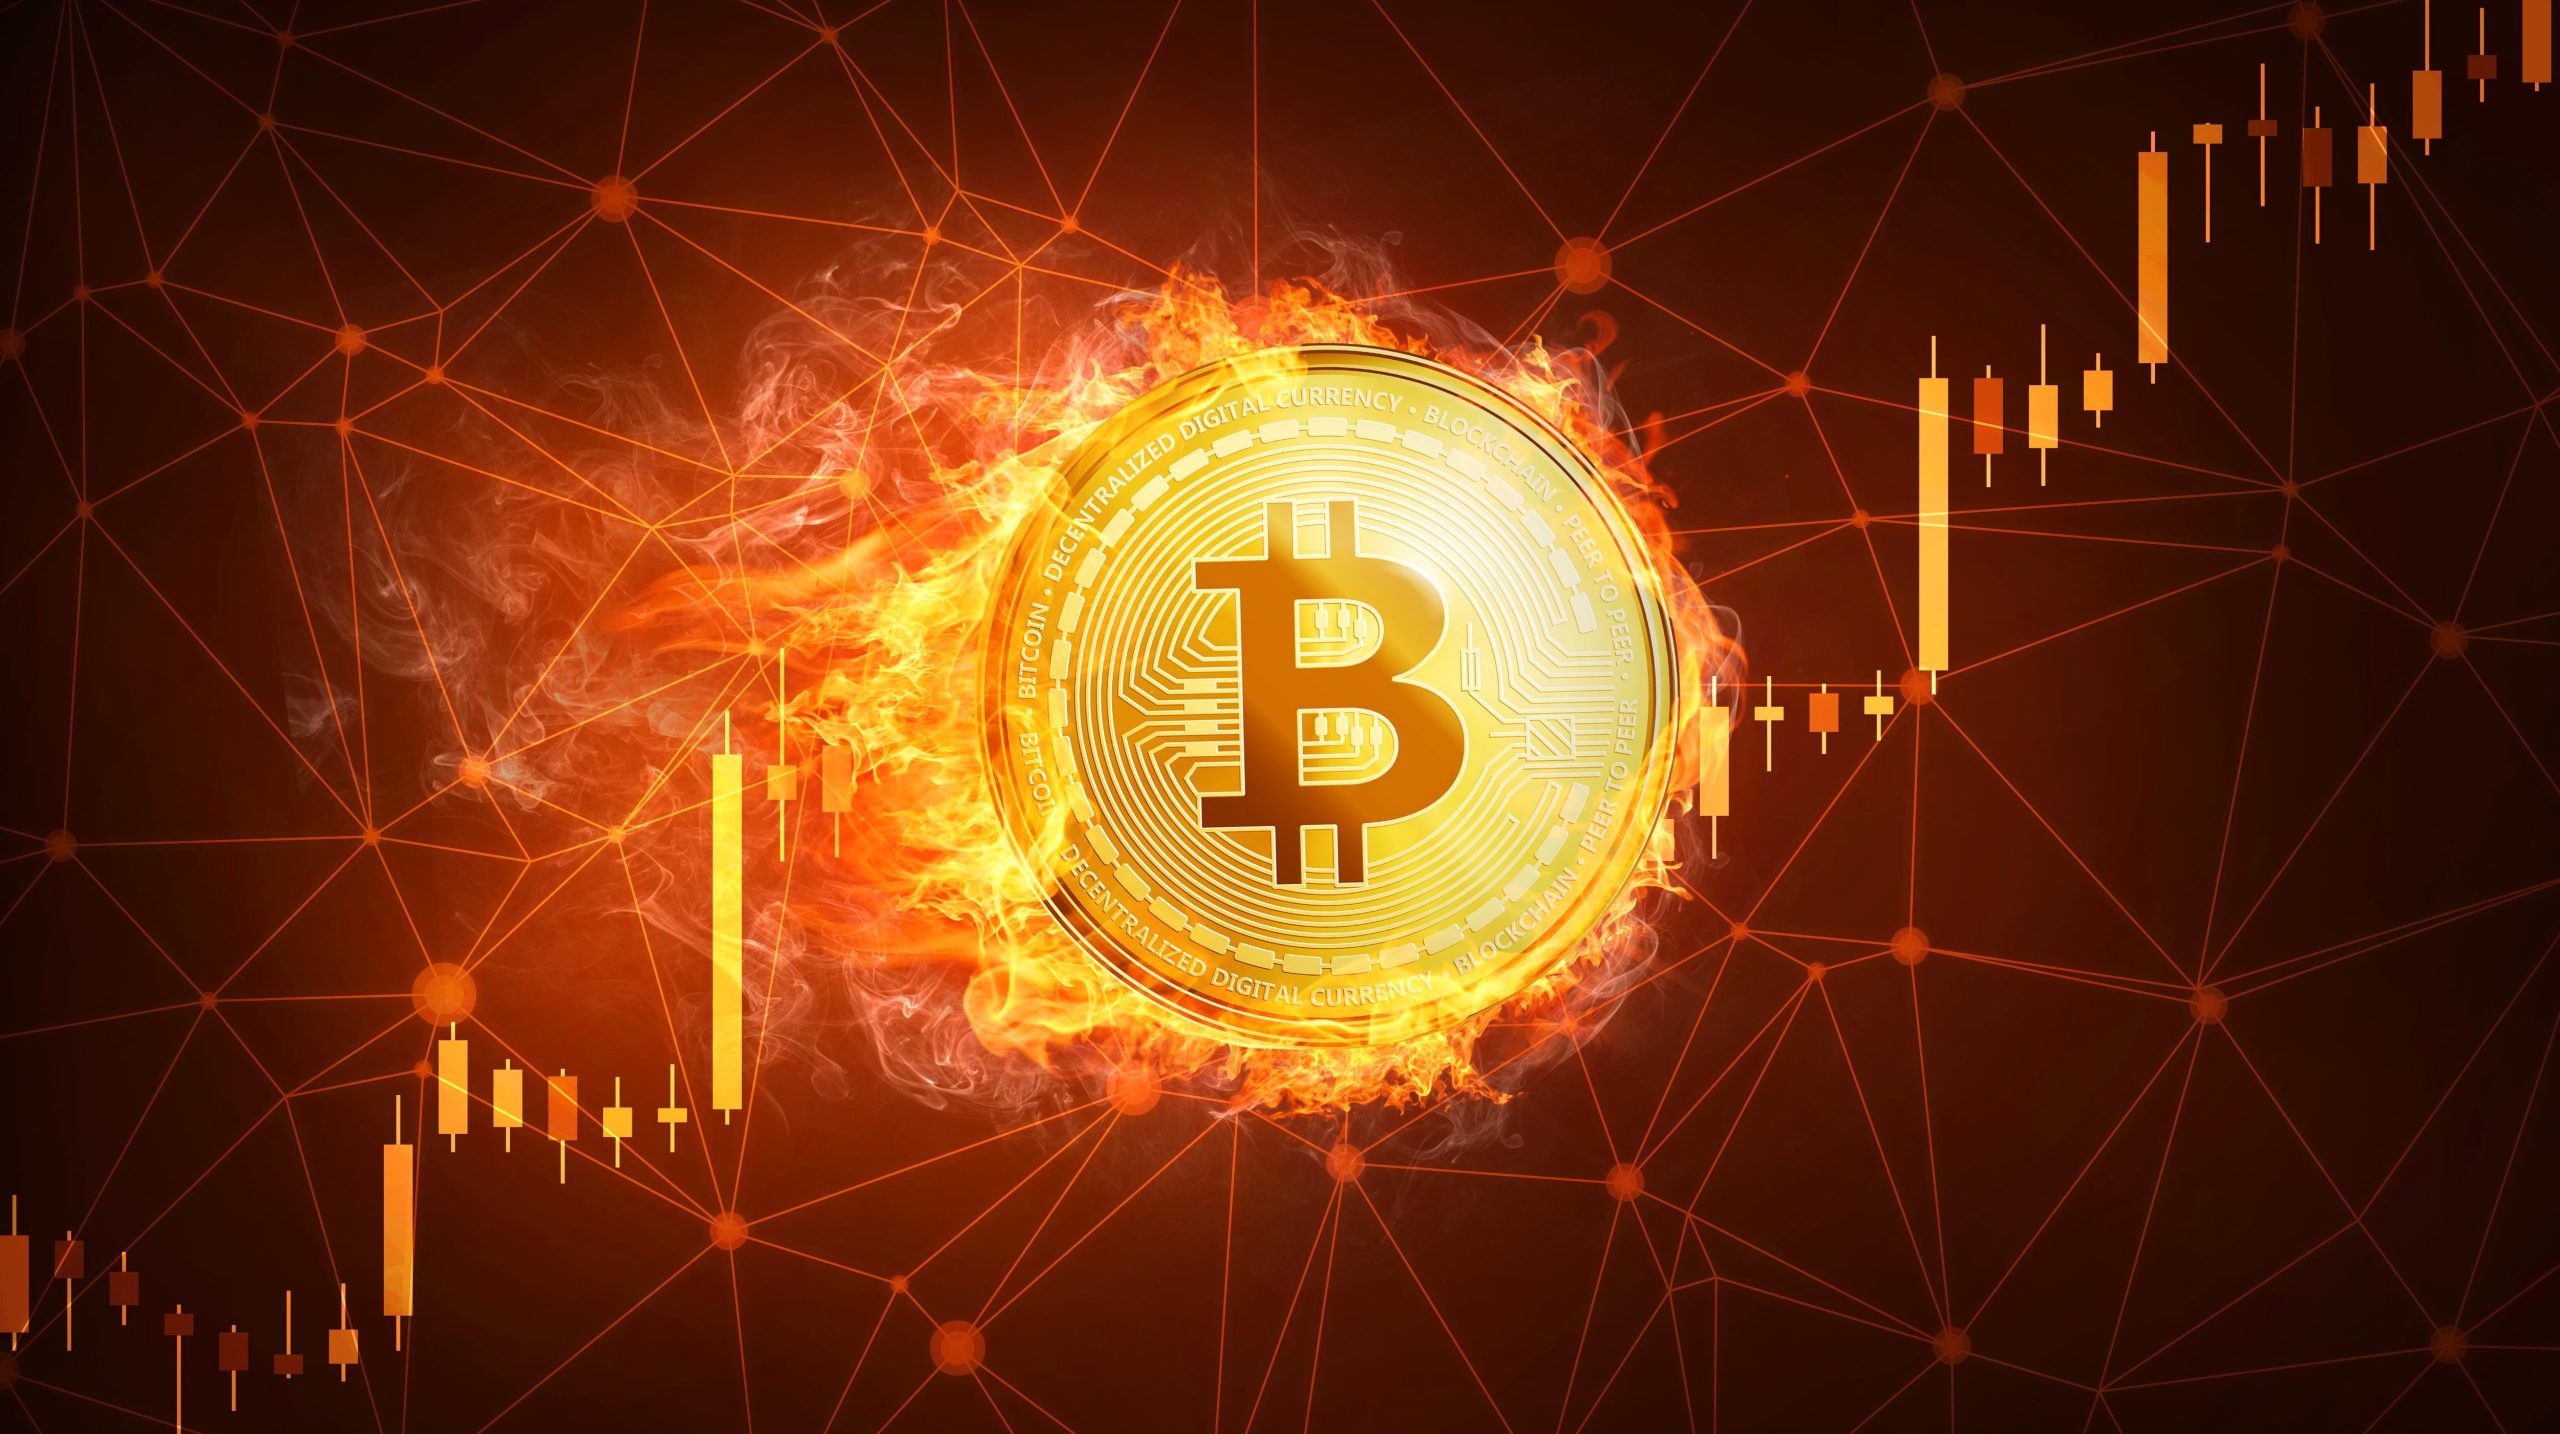 Bitcoin Price Prediction: BTC Tumbles As Analyst Warns Of 40% Post-Halving Slump, But This Bitcoin Derivative Is Set To Skyrocket On ETF Approvals